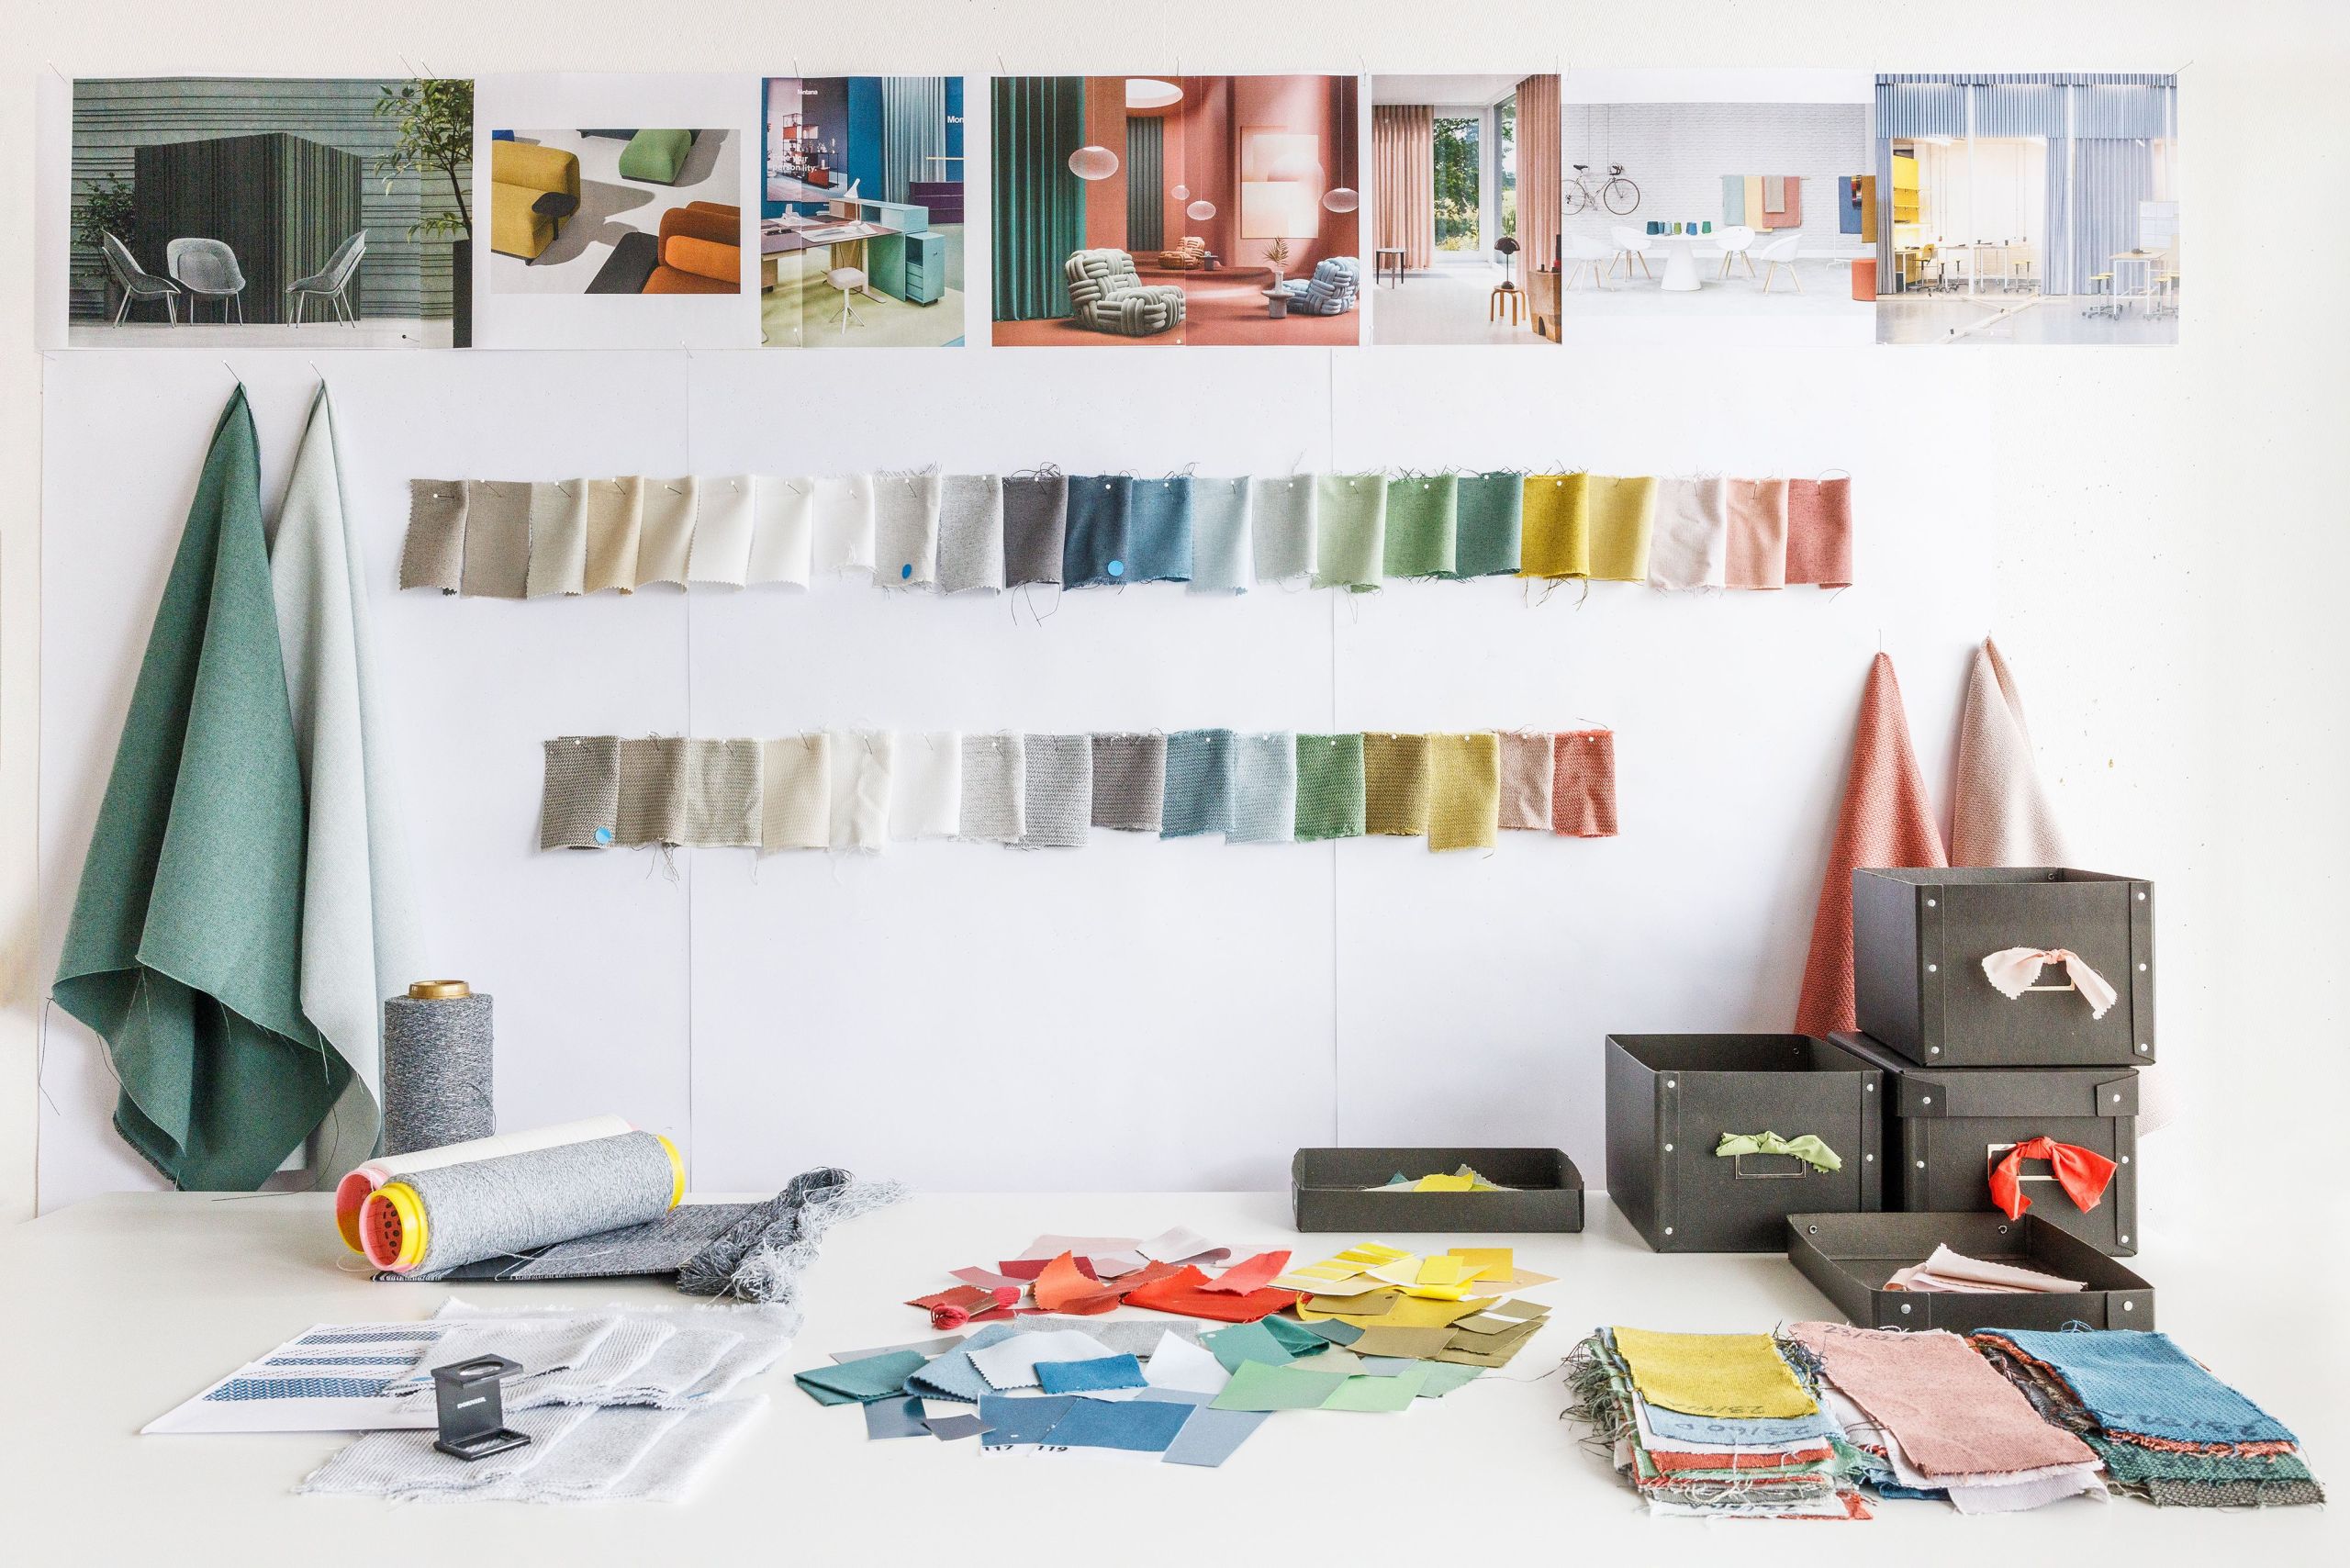 A look inside the design studio shows the creative process involved in developing a new textile solution.